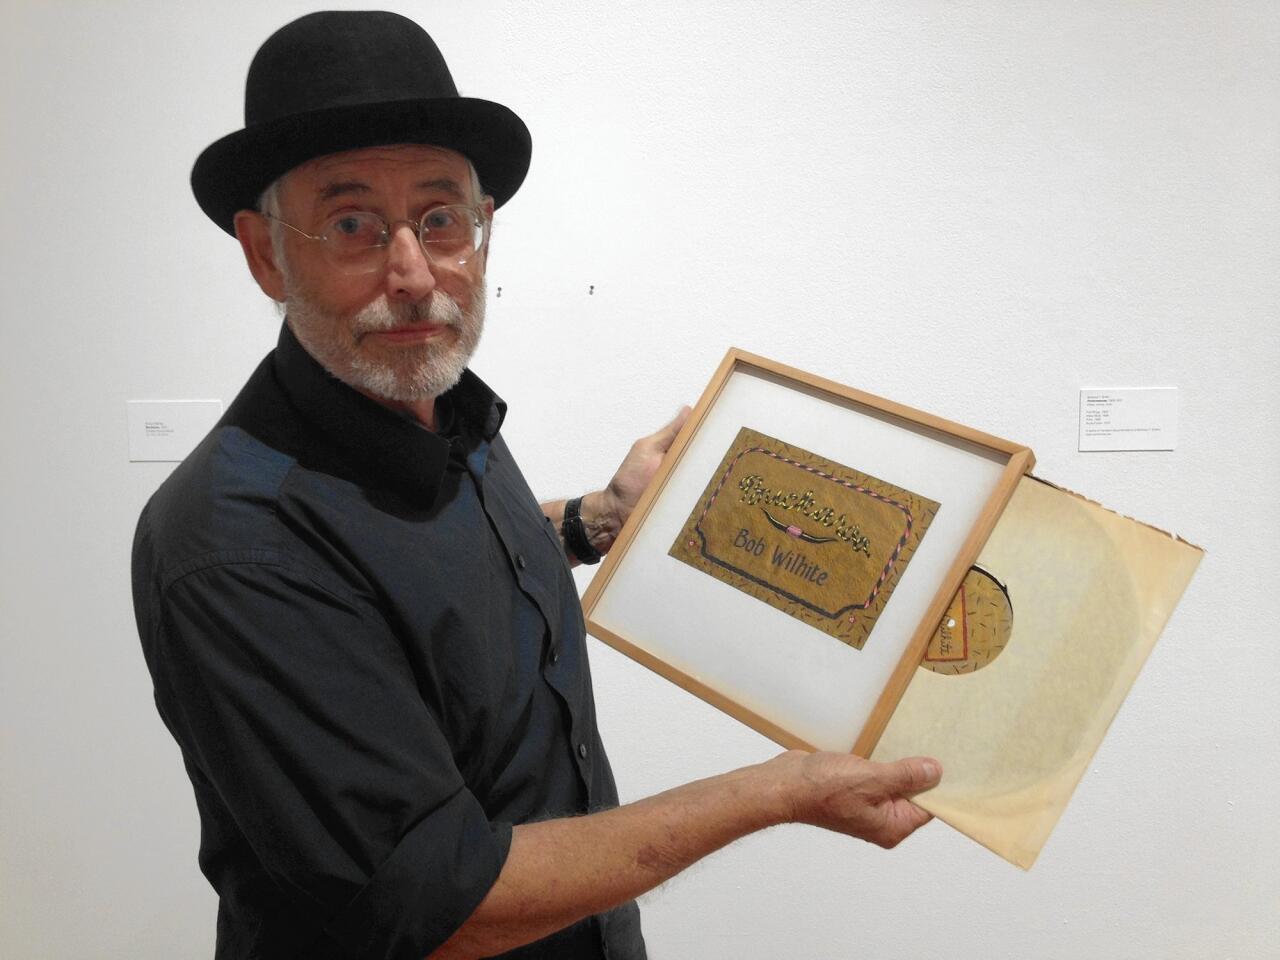 Artist and UC Irvine graduate Robert Wilhite demonstrates how his 1976 artwork, "Buckaroo," is actually a handmade record case with a real vinyl record inside. His work is on view in the University Art Gallery through Dec. 12.